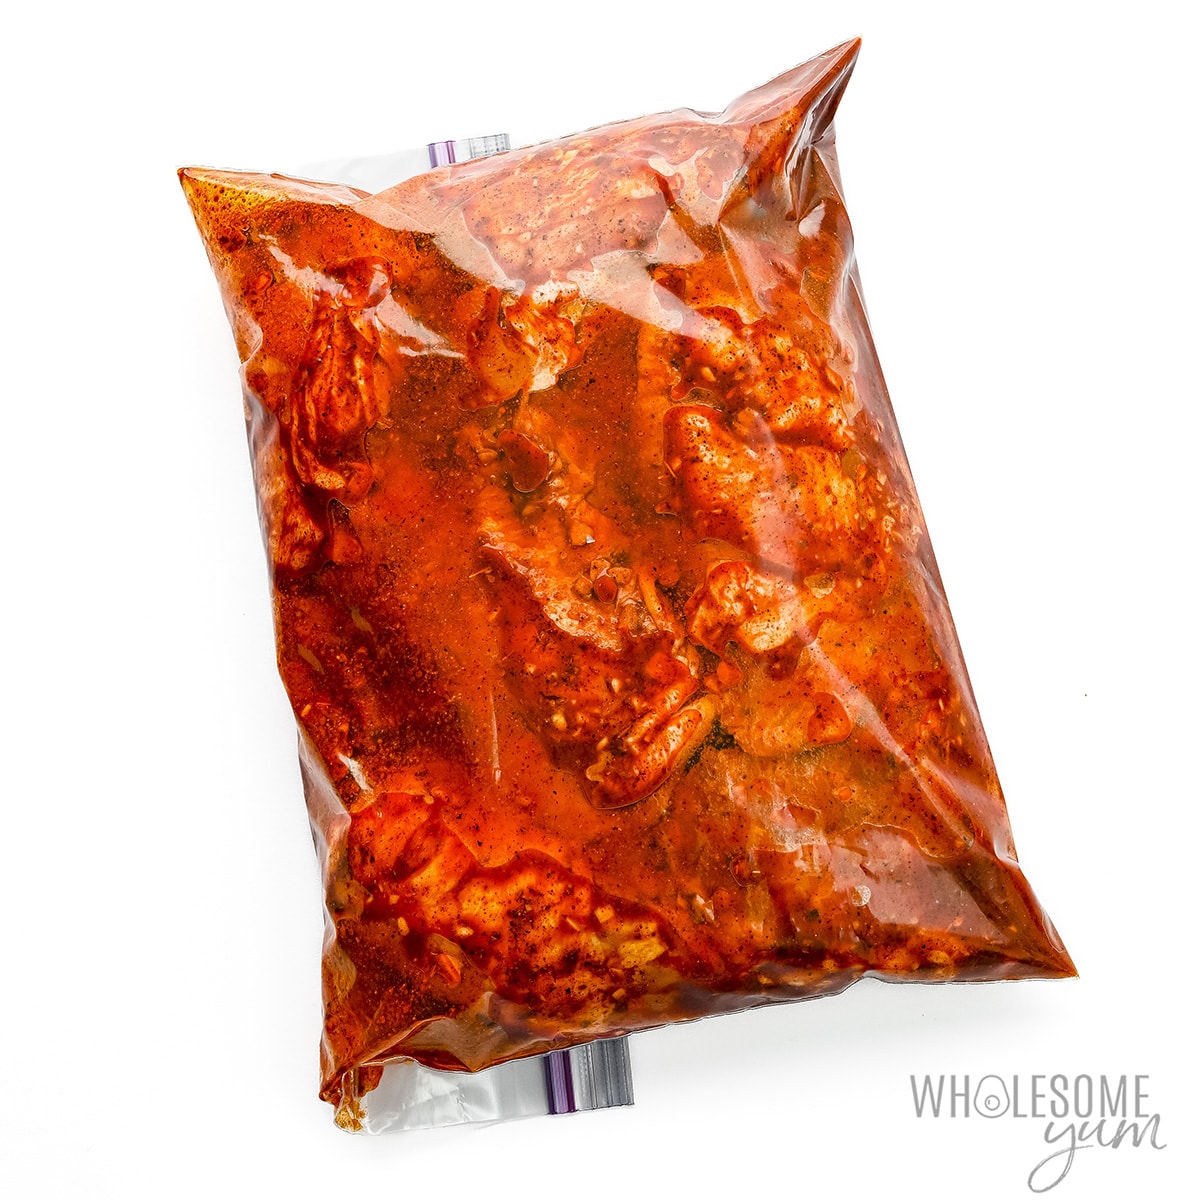 Chicken marinating in a bag.